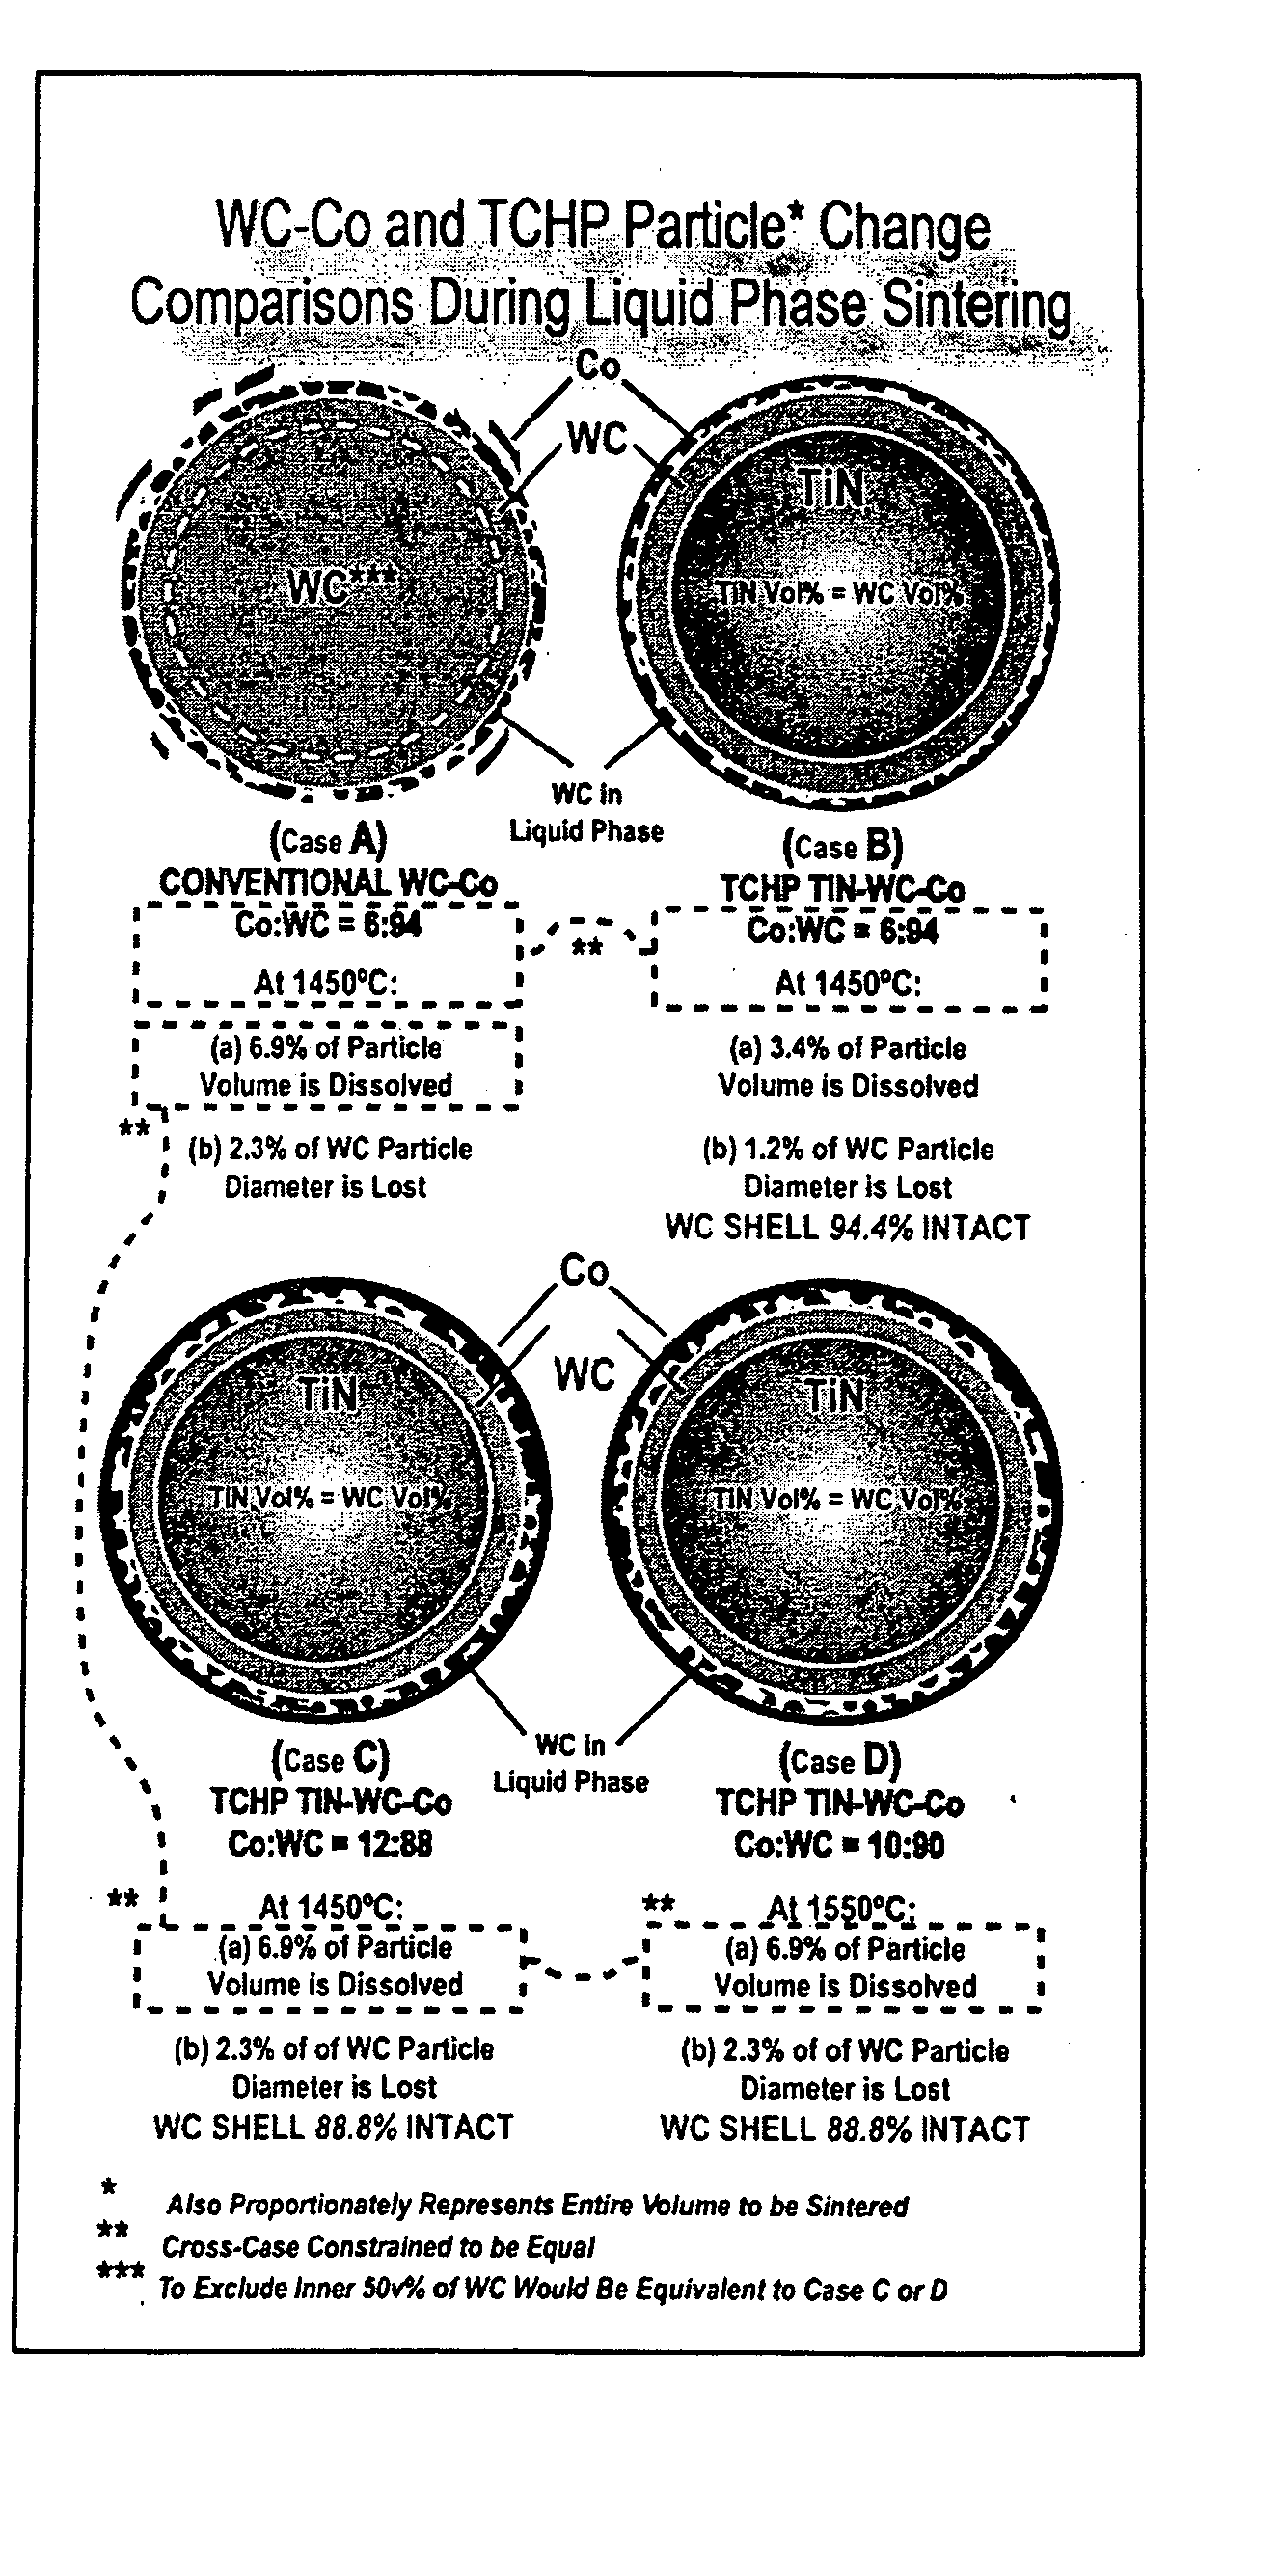 Method for consolidating tough coated hard powders